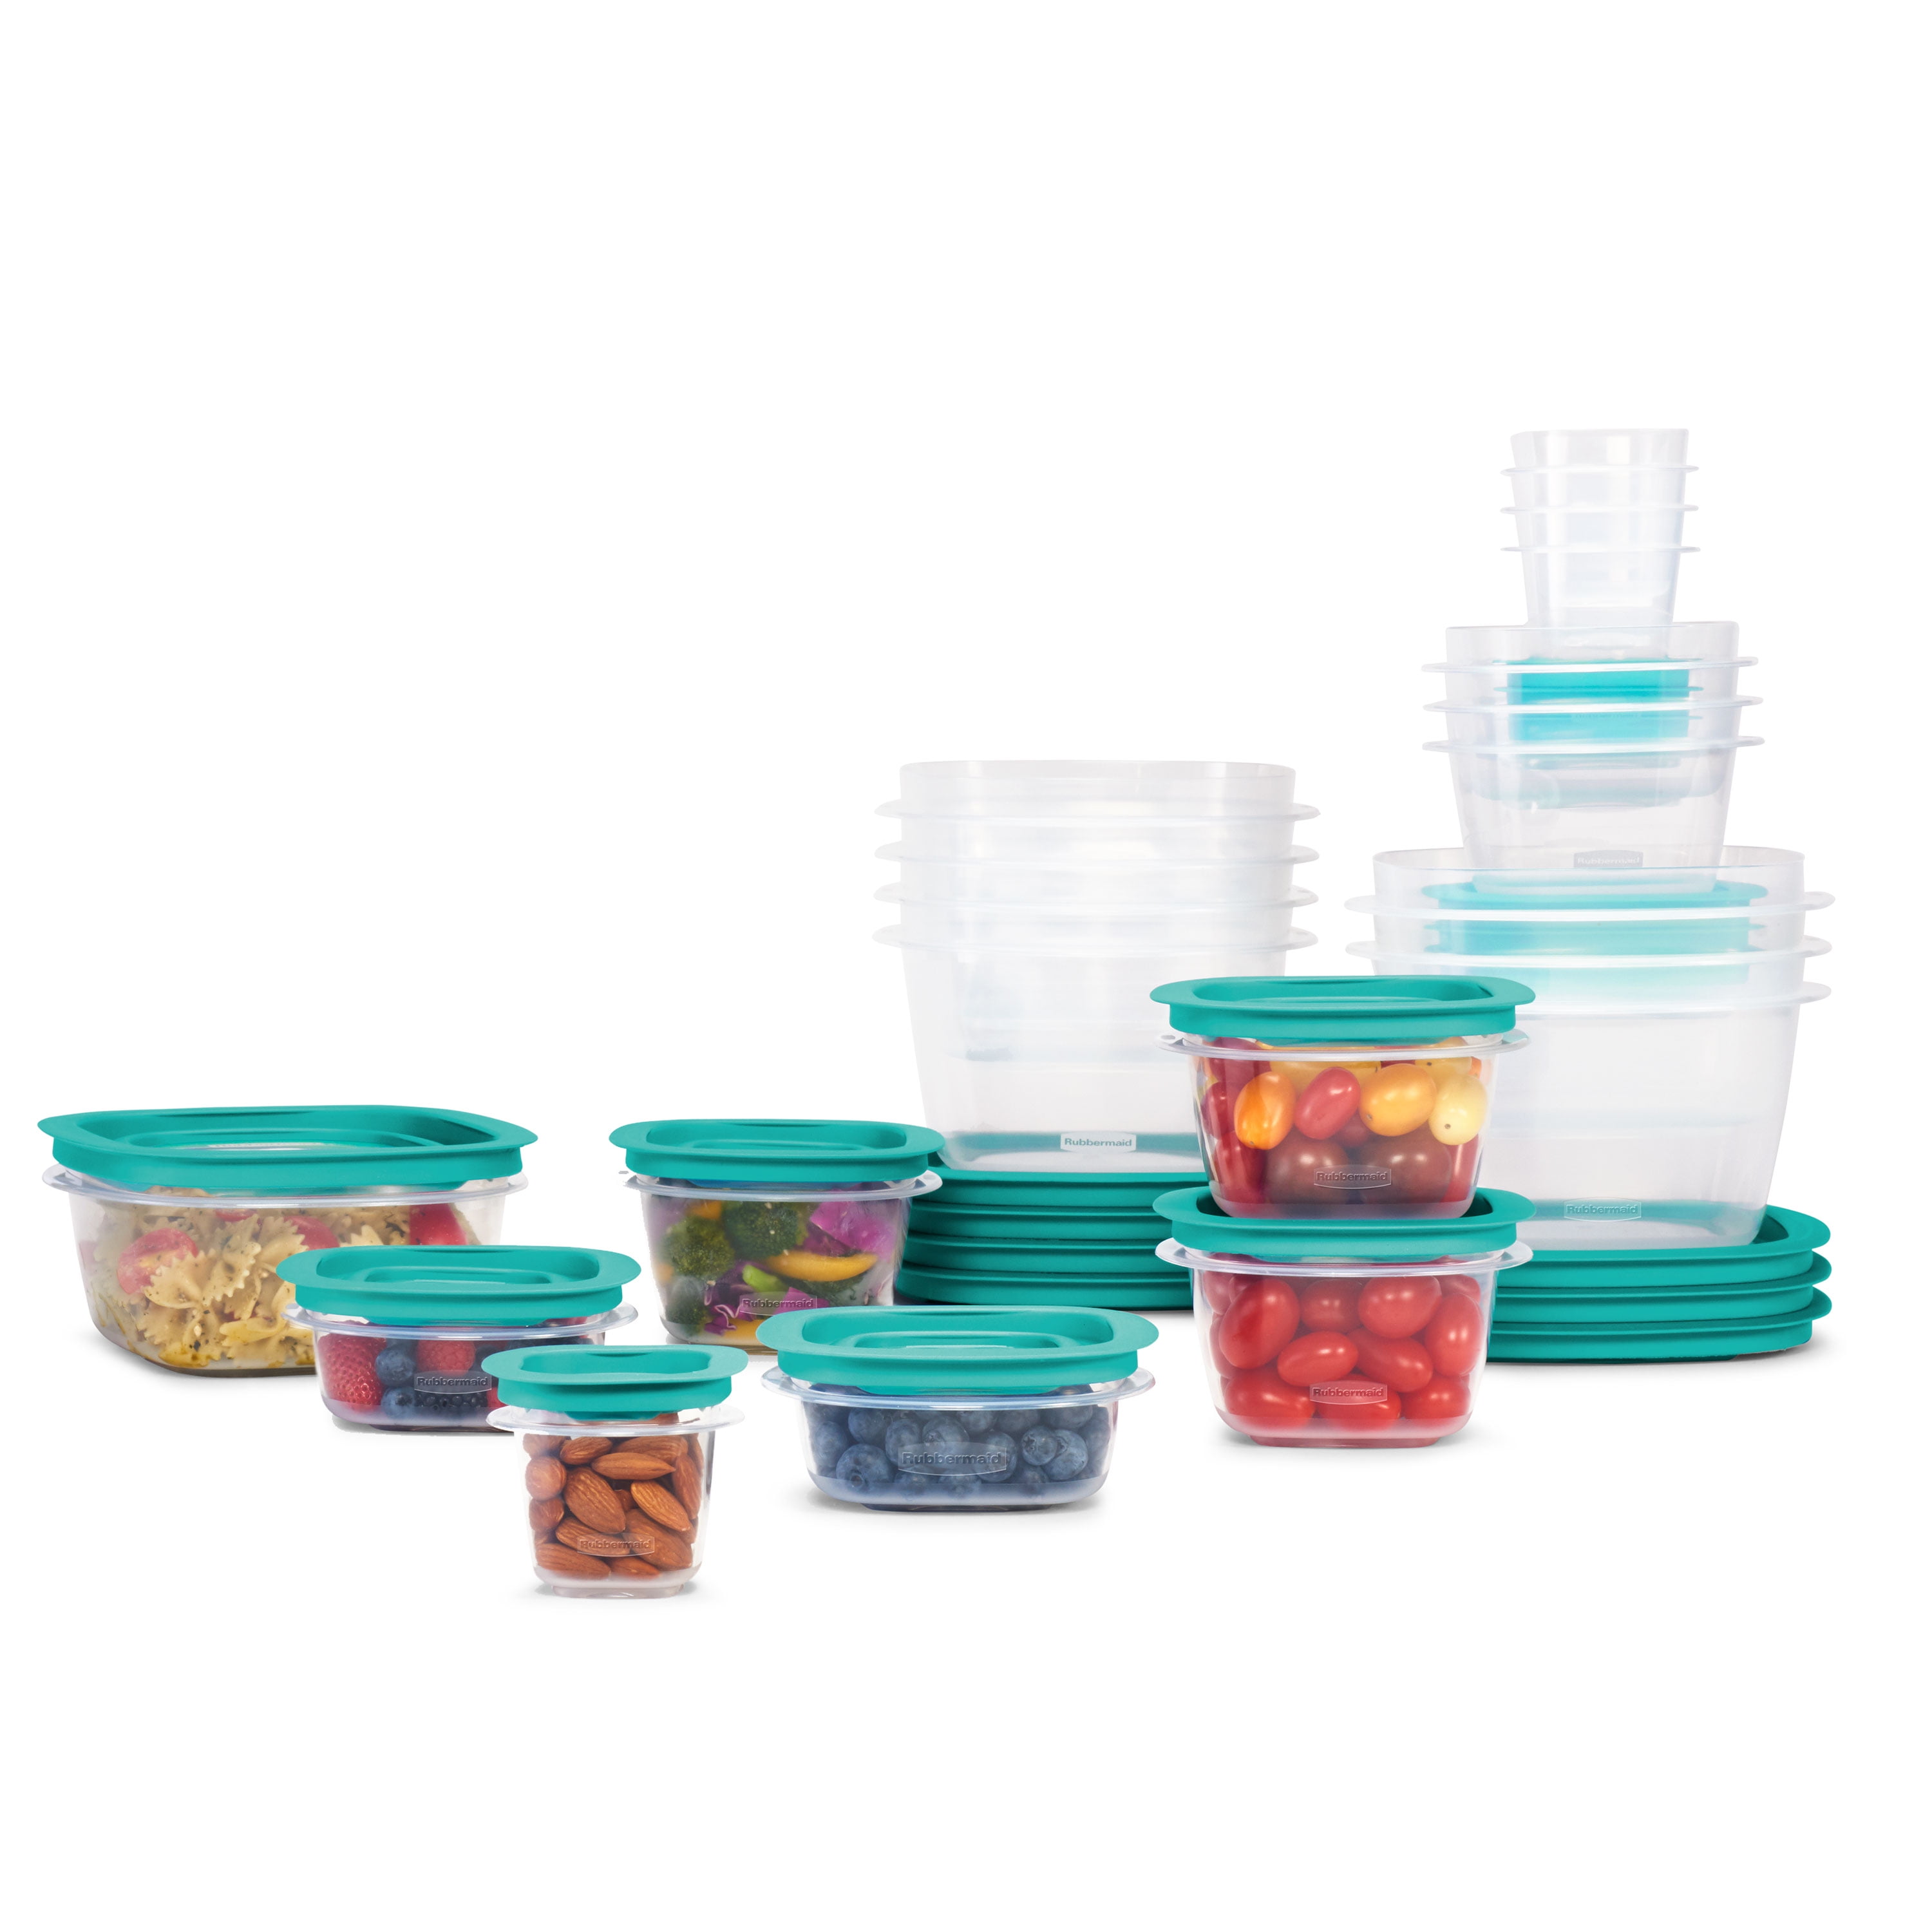 Rubbermaid FG7J9300FRESH Food Container Set, 2, 5, 14 Cup